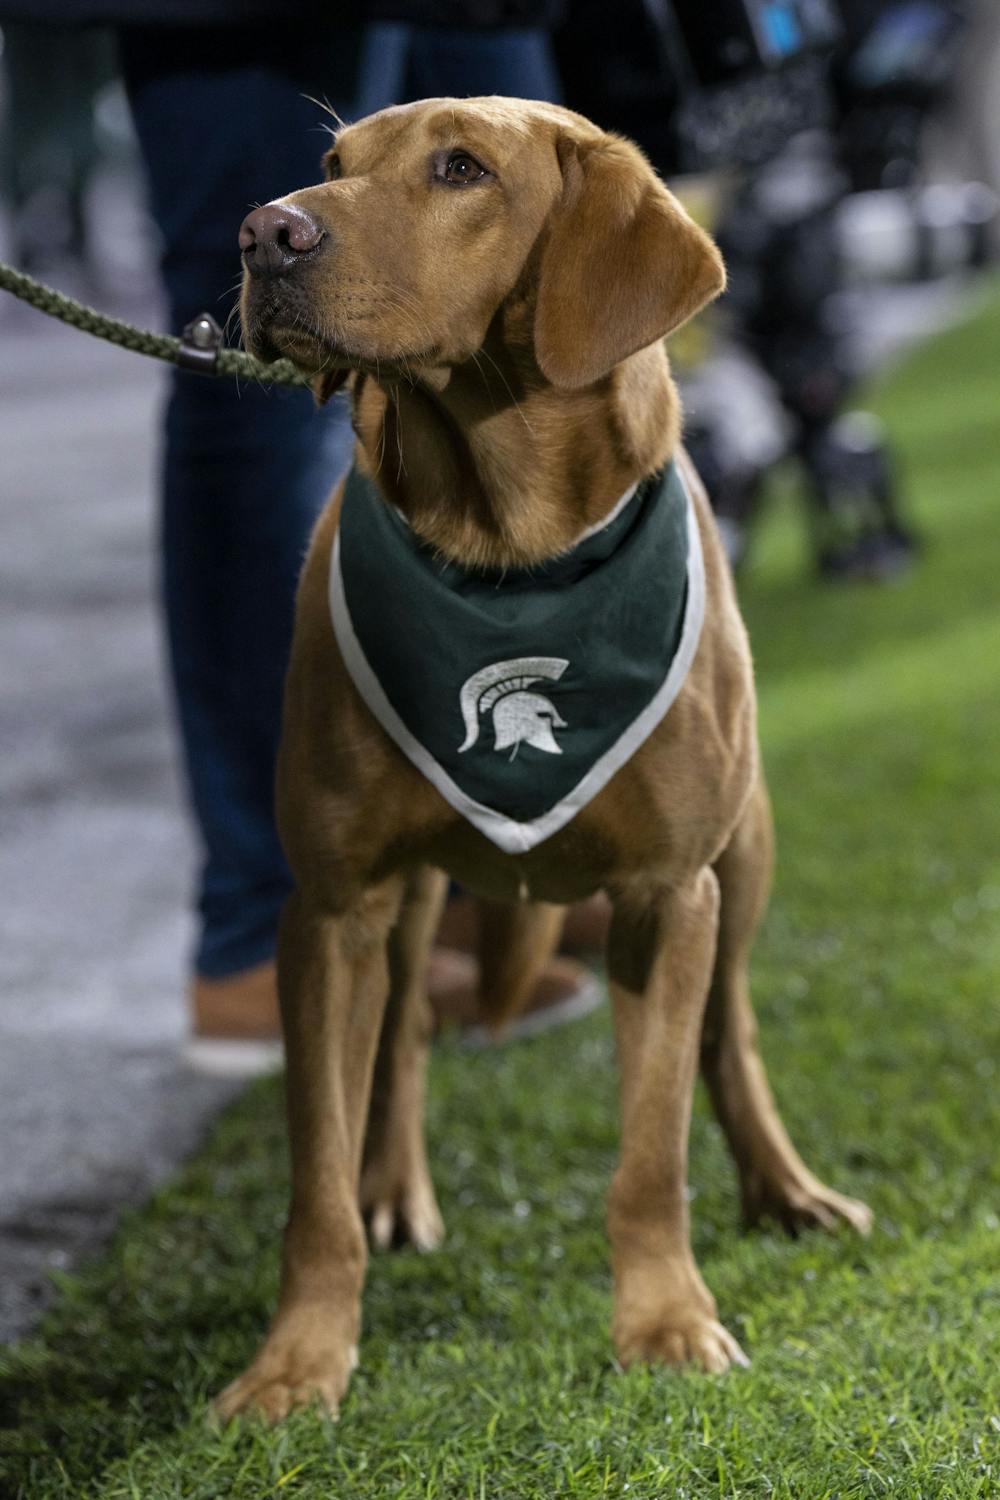 Zeke the Wonderdog during the game against Wisconsin on October 15, 2022. The Spartans beat the Badgers 34 to 28.